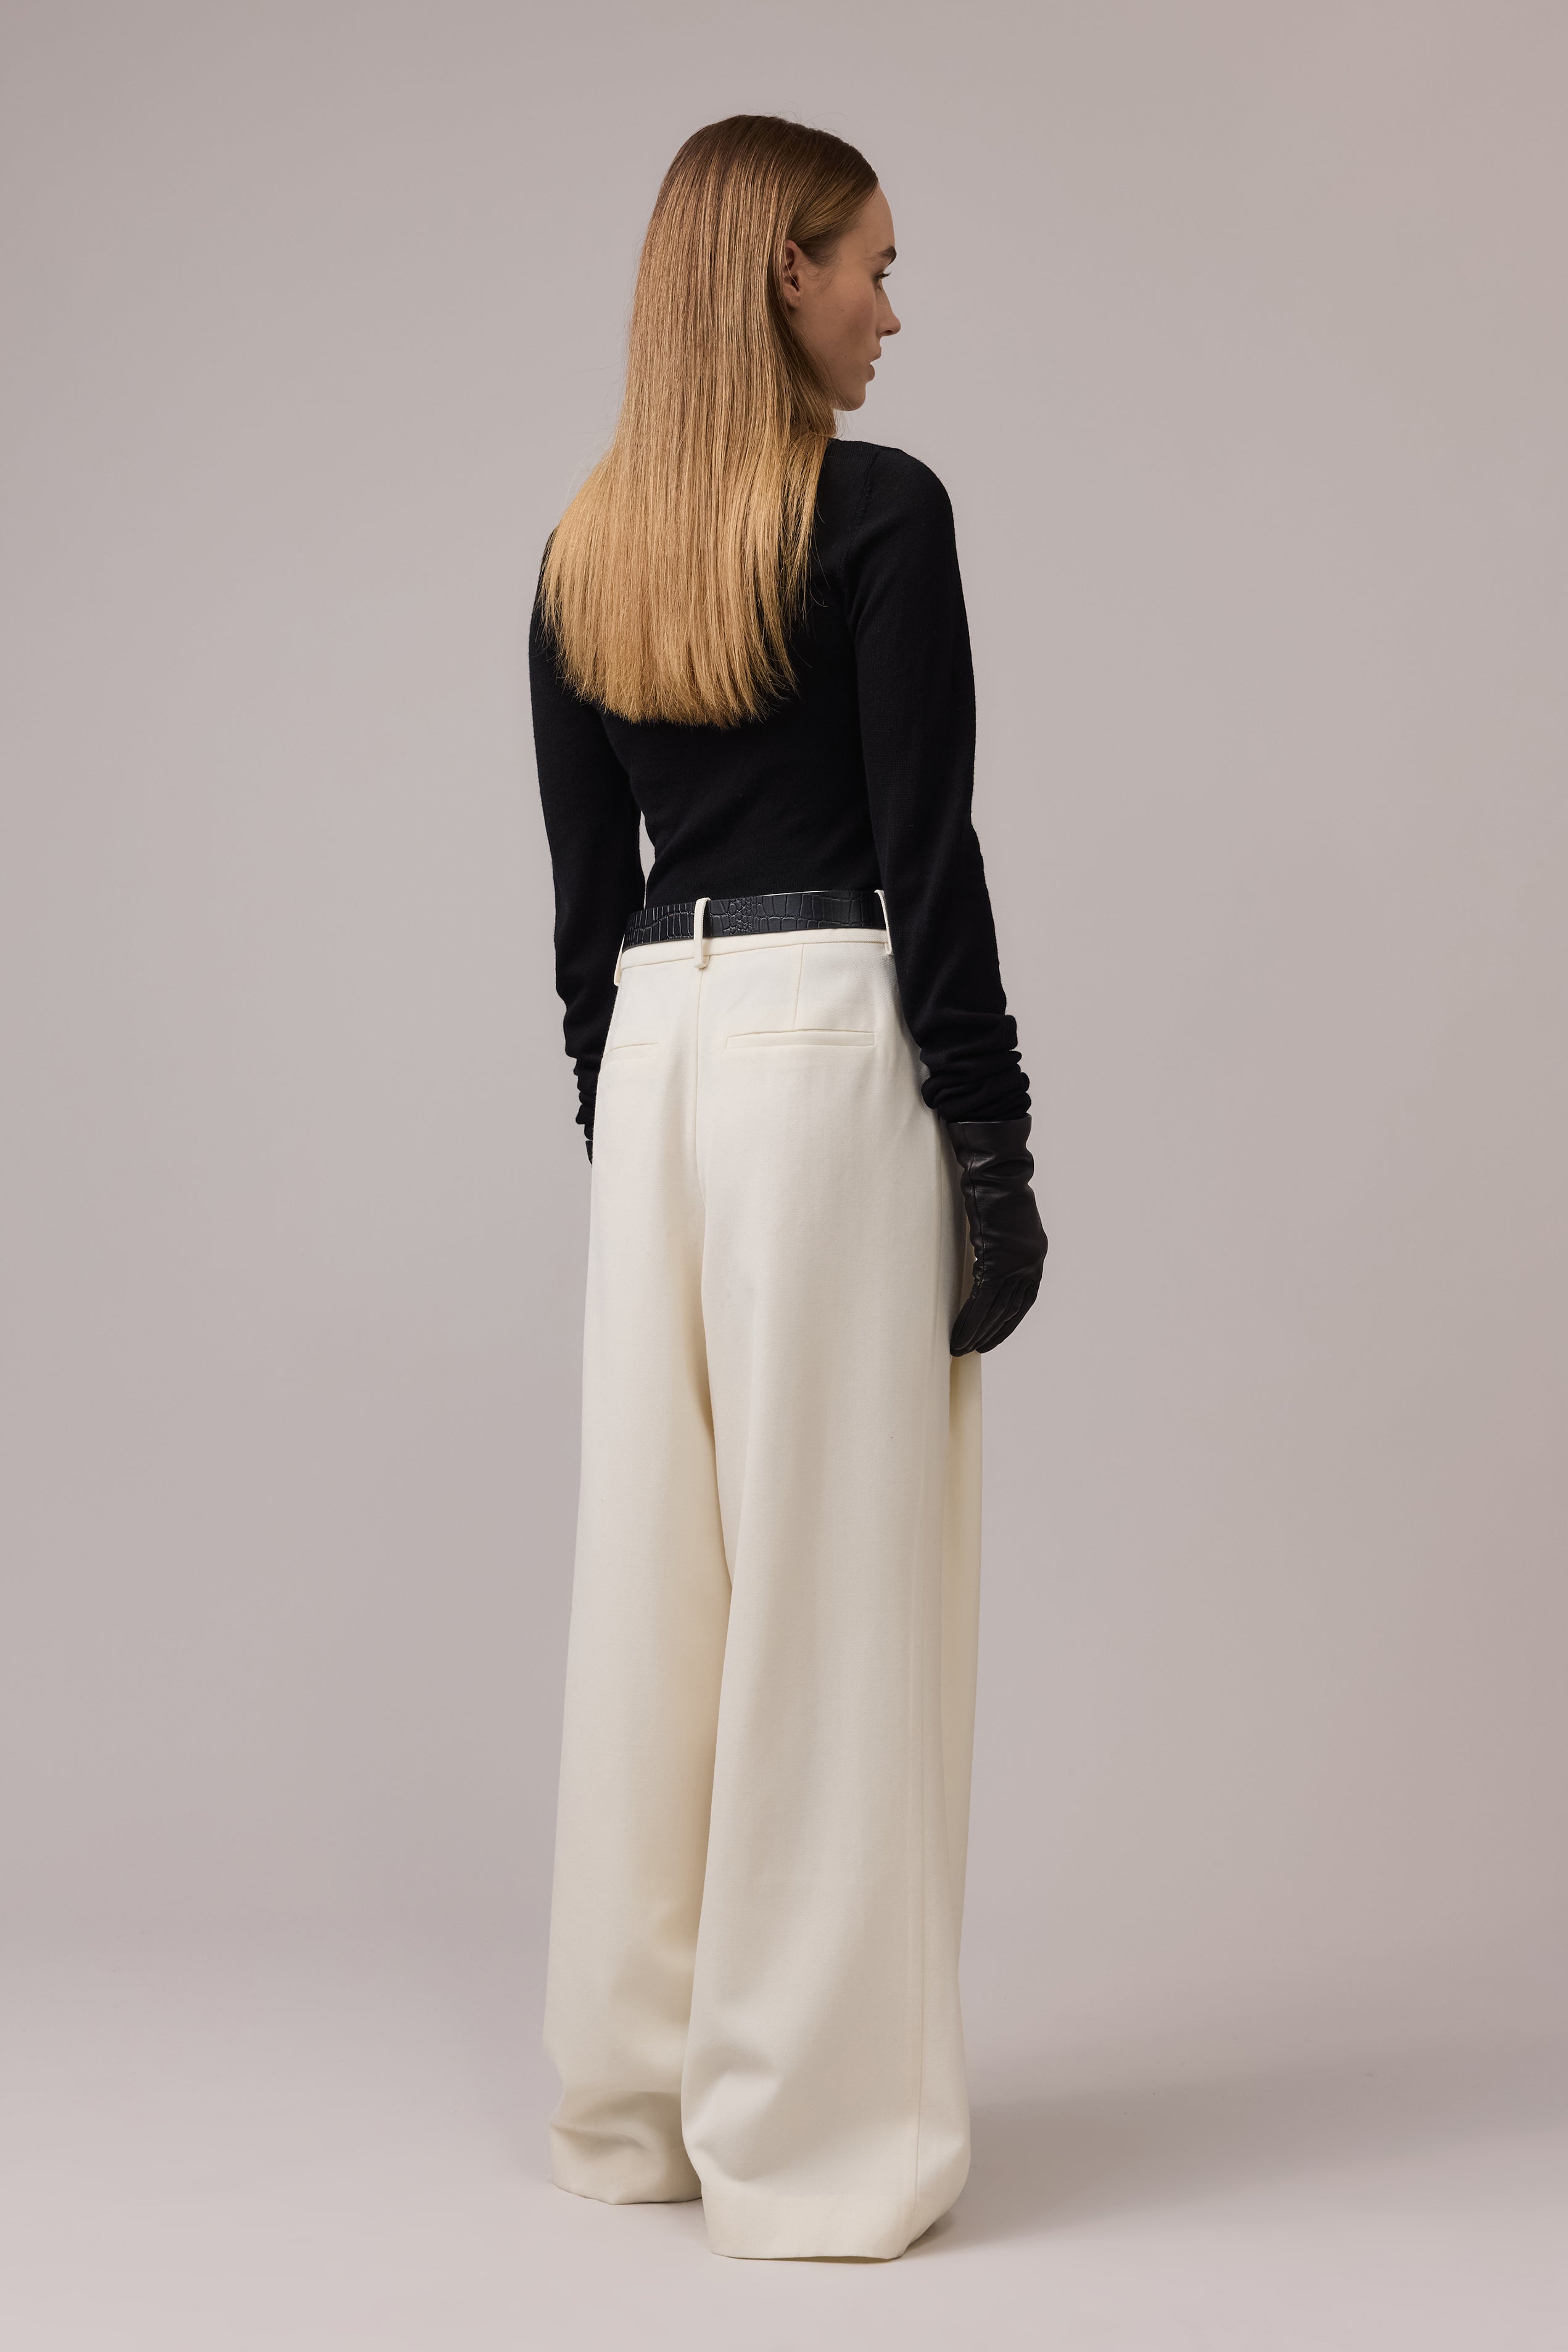 Lucy Wool Low Slung Pant